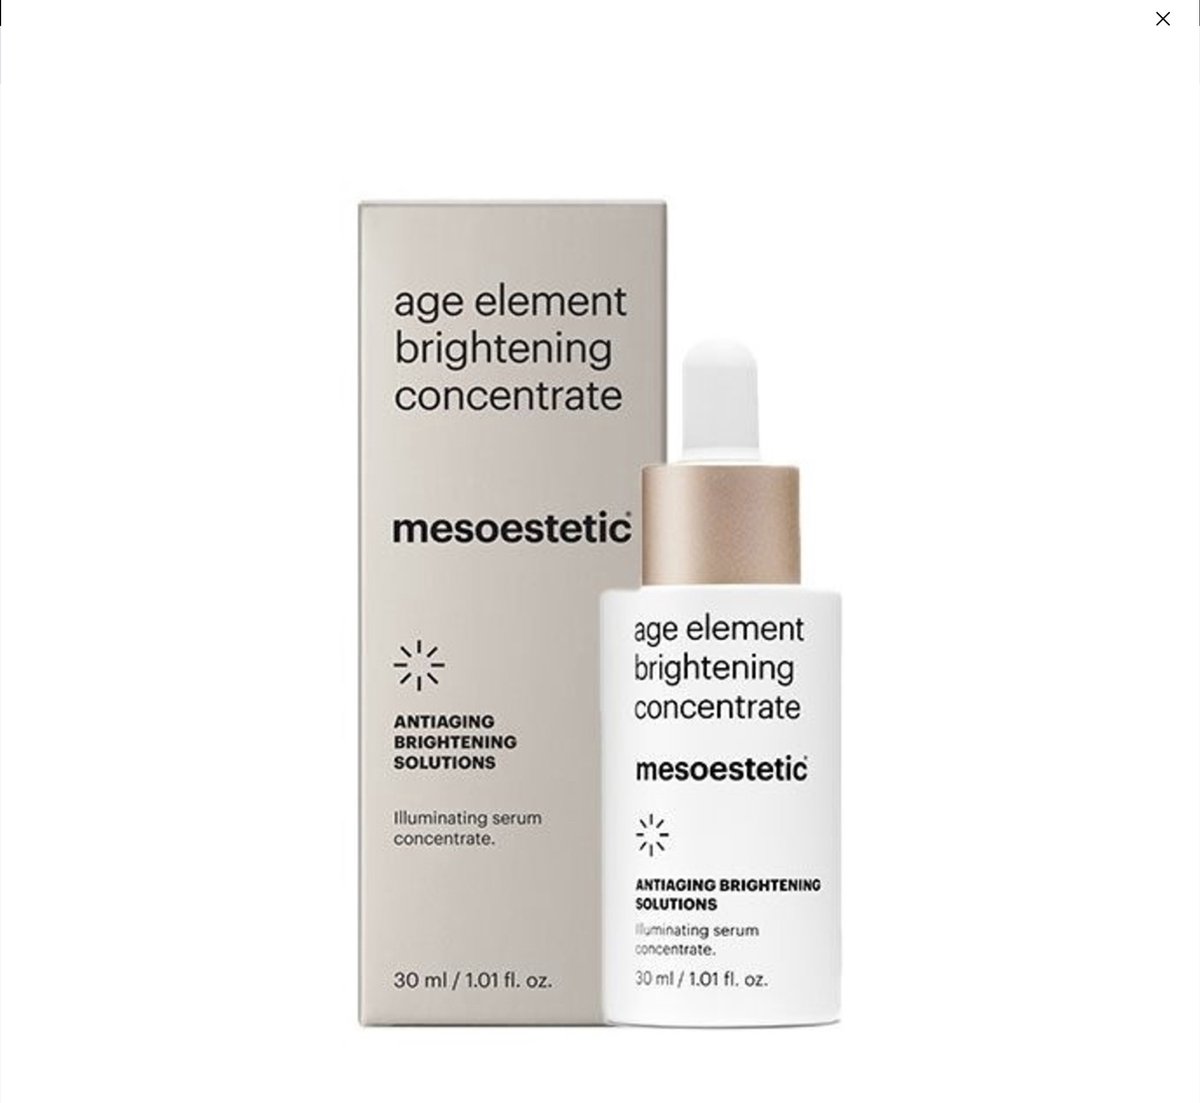 Mesoestetic - AGE Element Brightening Concentrate - 30 ml